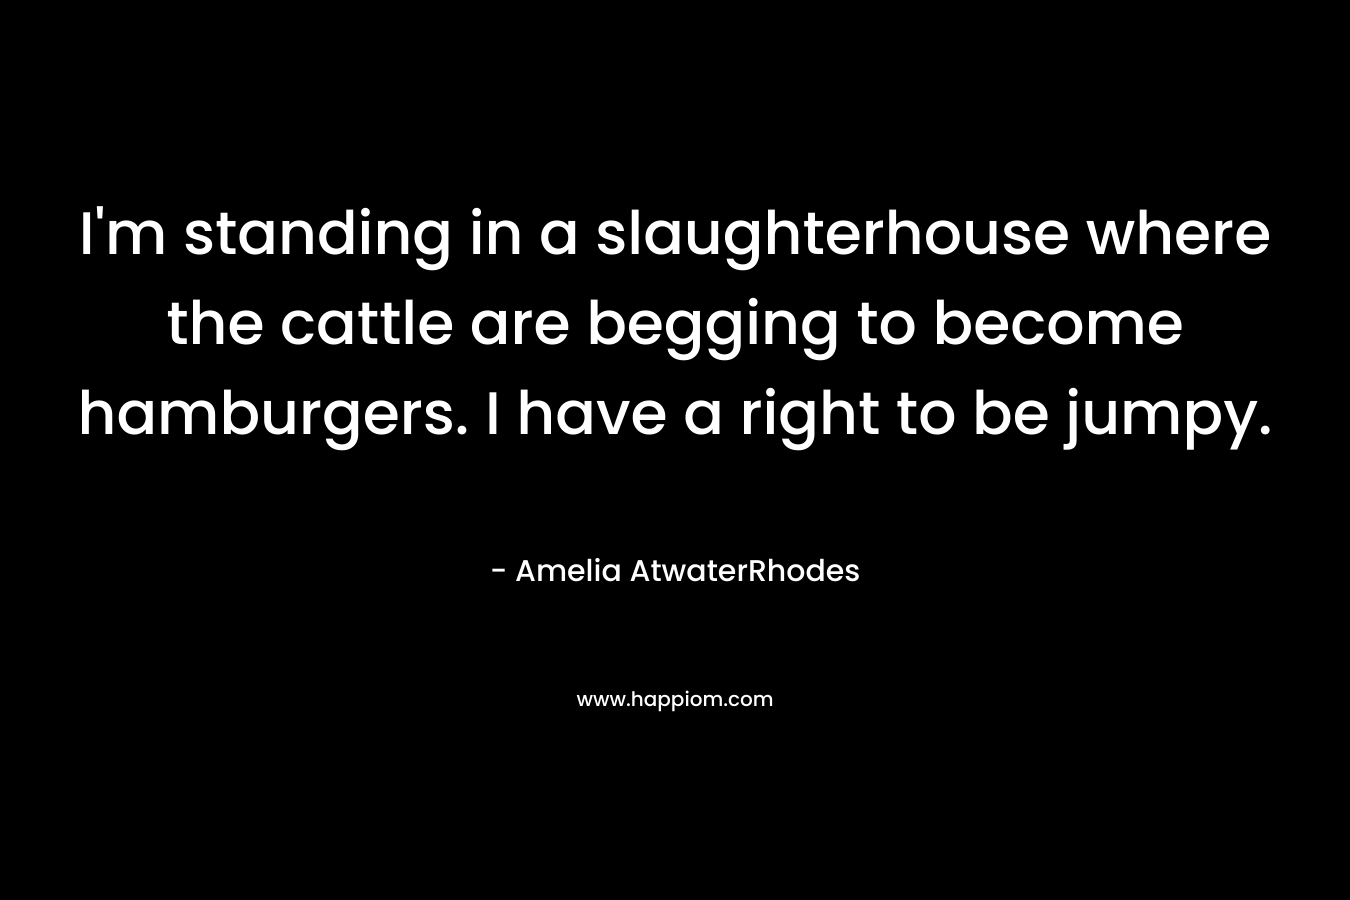 I'm standing in a slaughterhouse where the cattle are begging to become hamburgers. I have a right to be jumpy.